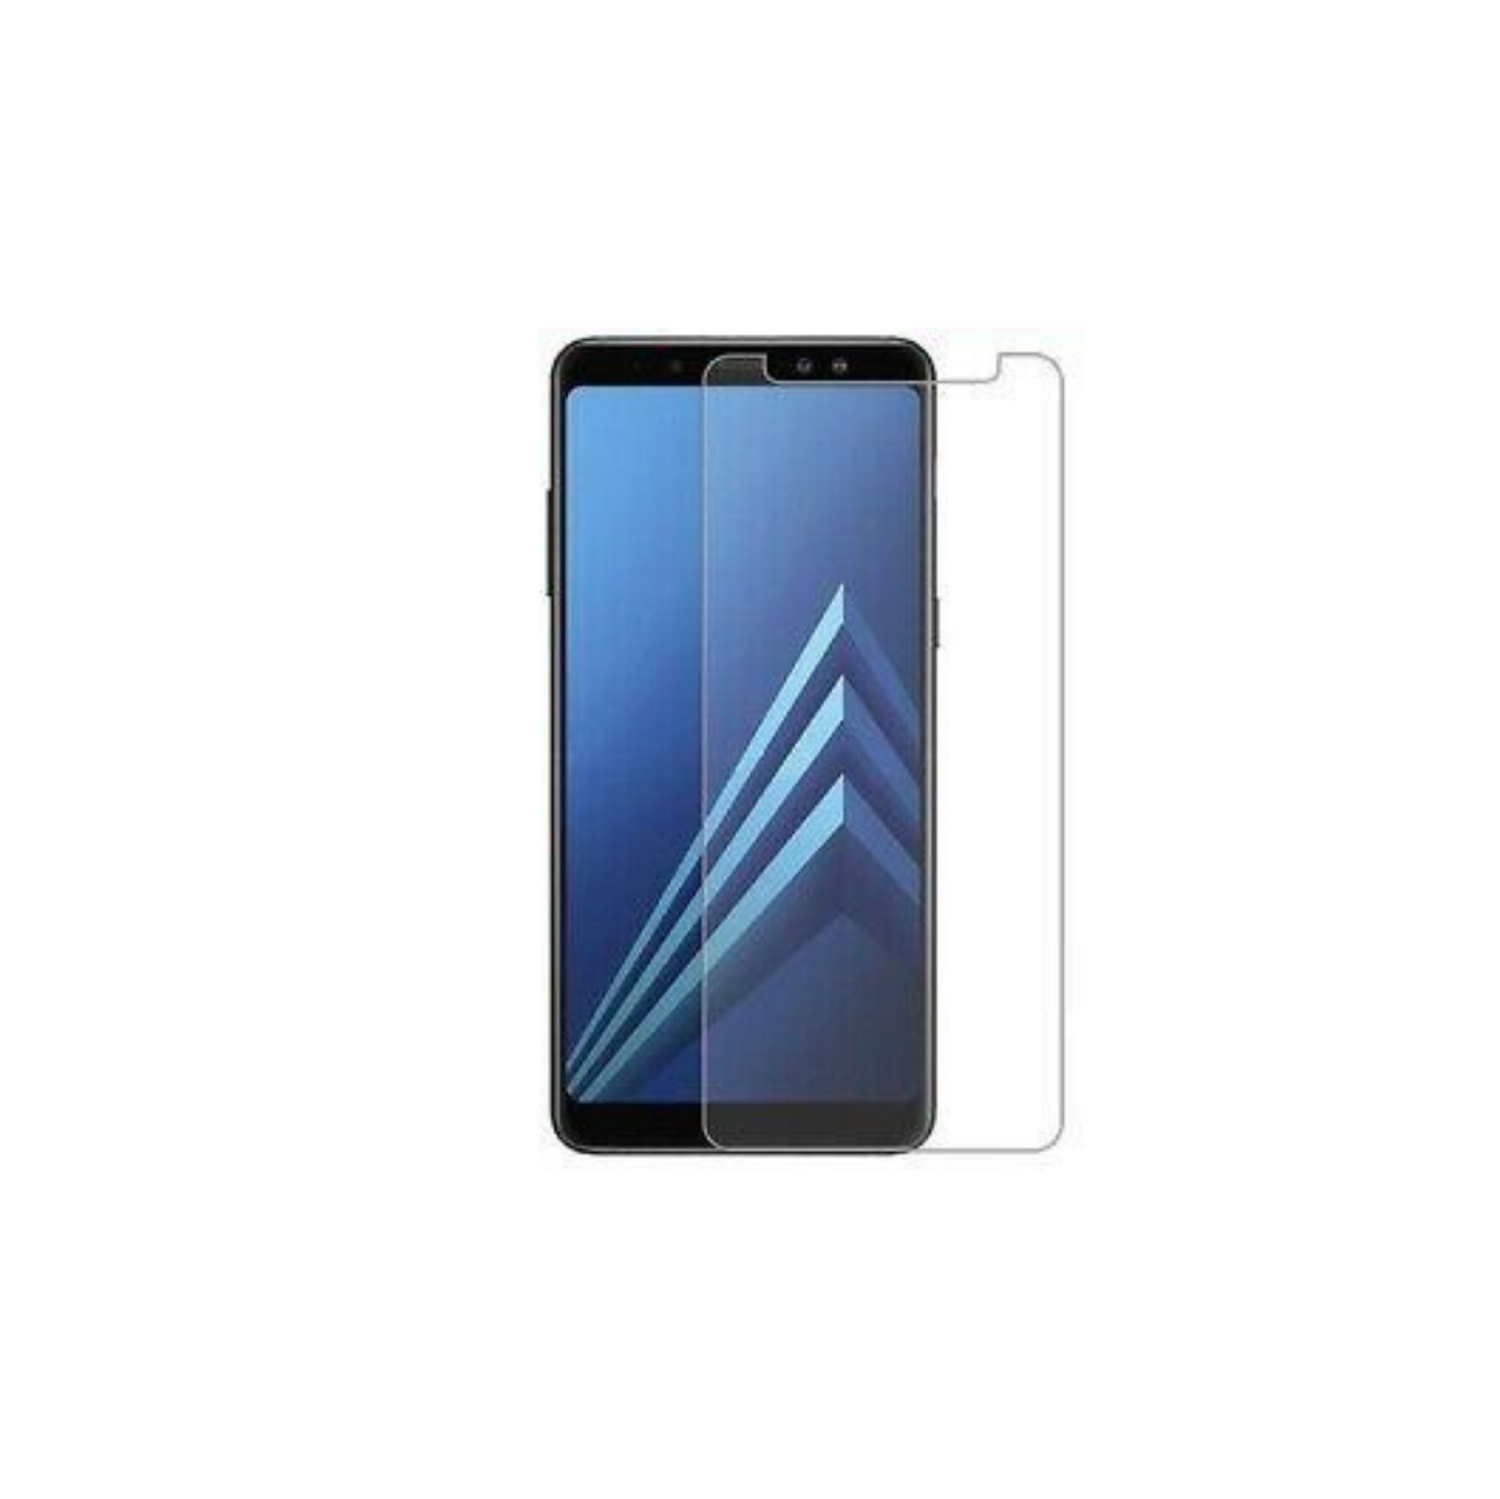 Premium Tempered Glass Screen Protector for Samsung Galaxy A8 2018